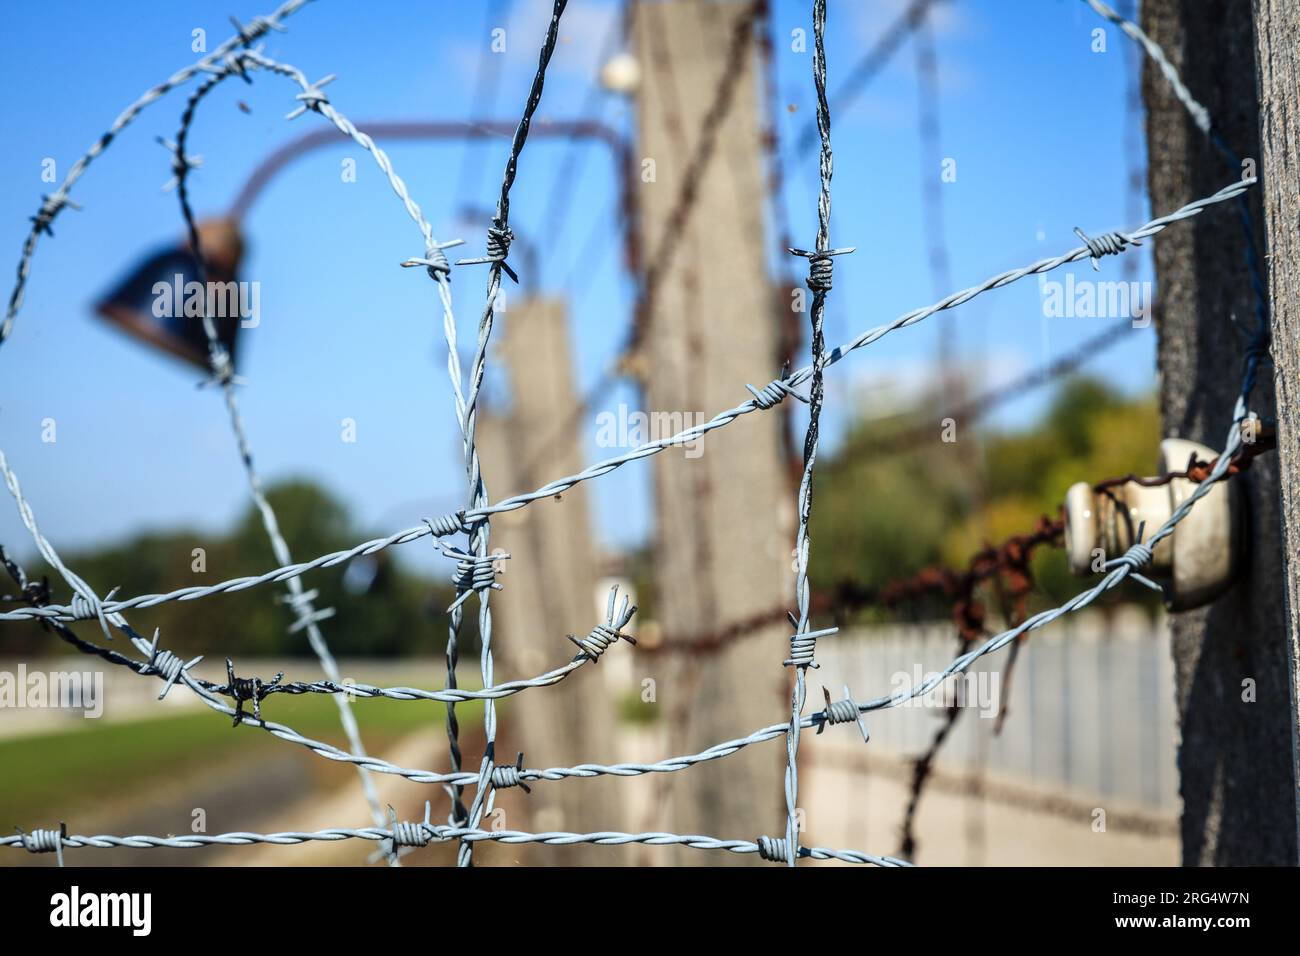 https://c8.alamy.com/comp/2RG4W7N/close-up-image-of-barbed-wire-of-the-perimeter-fence-2RG4W7N.jpg